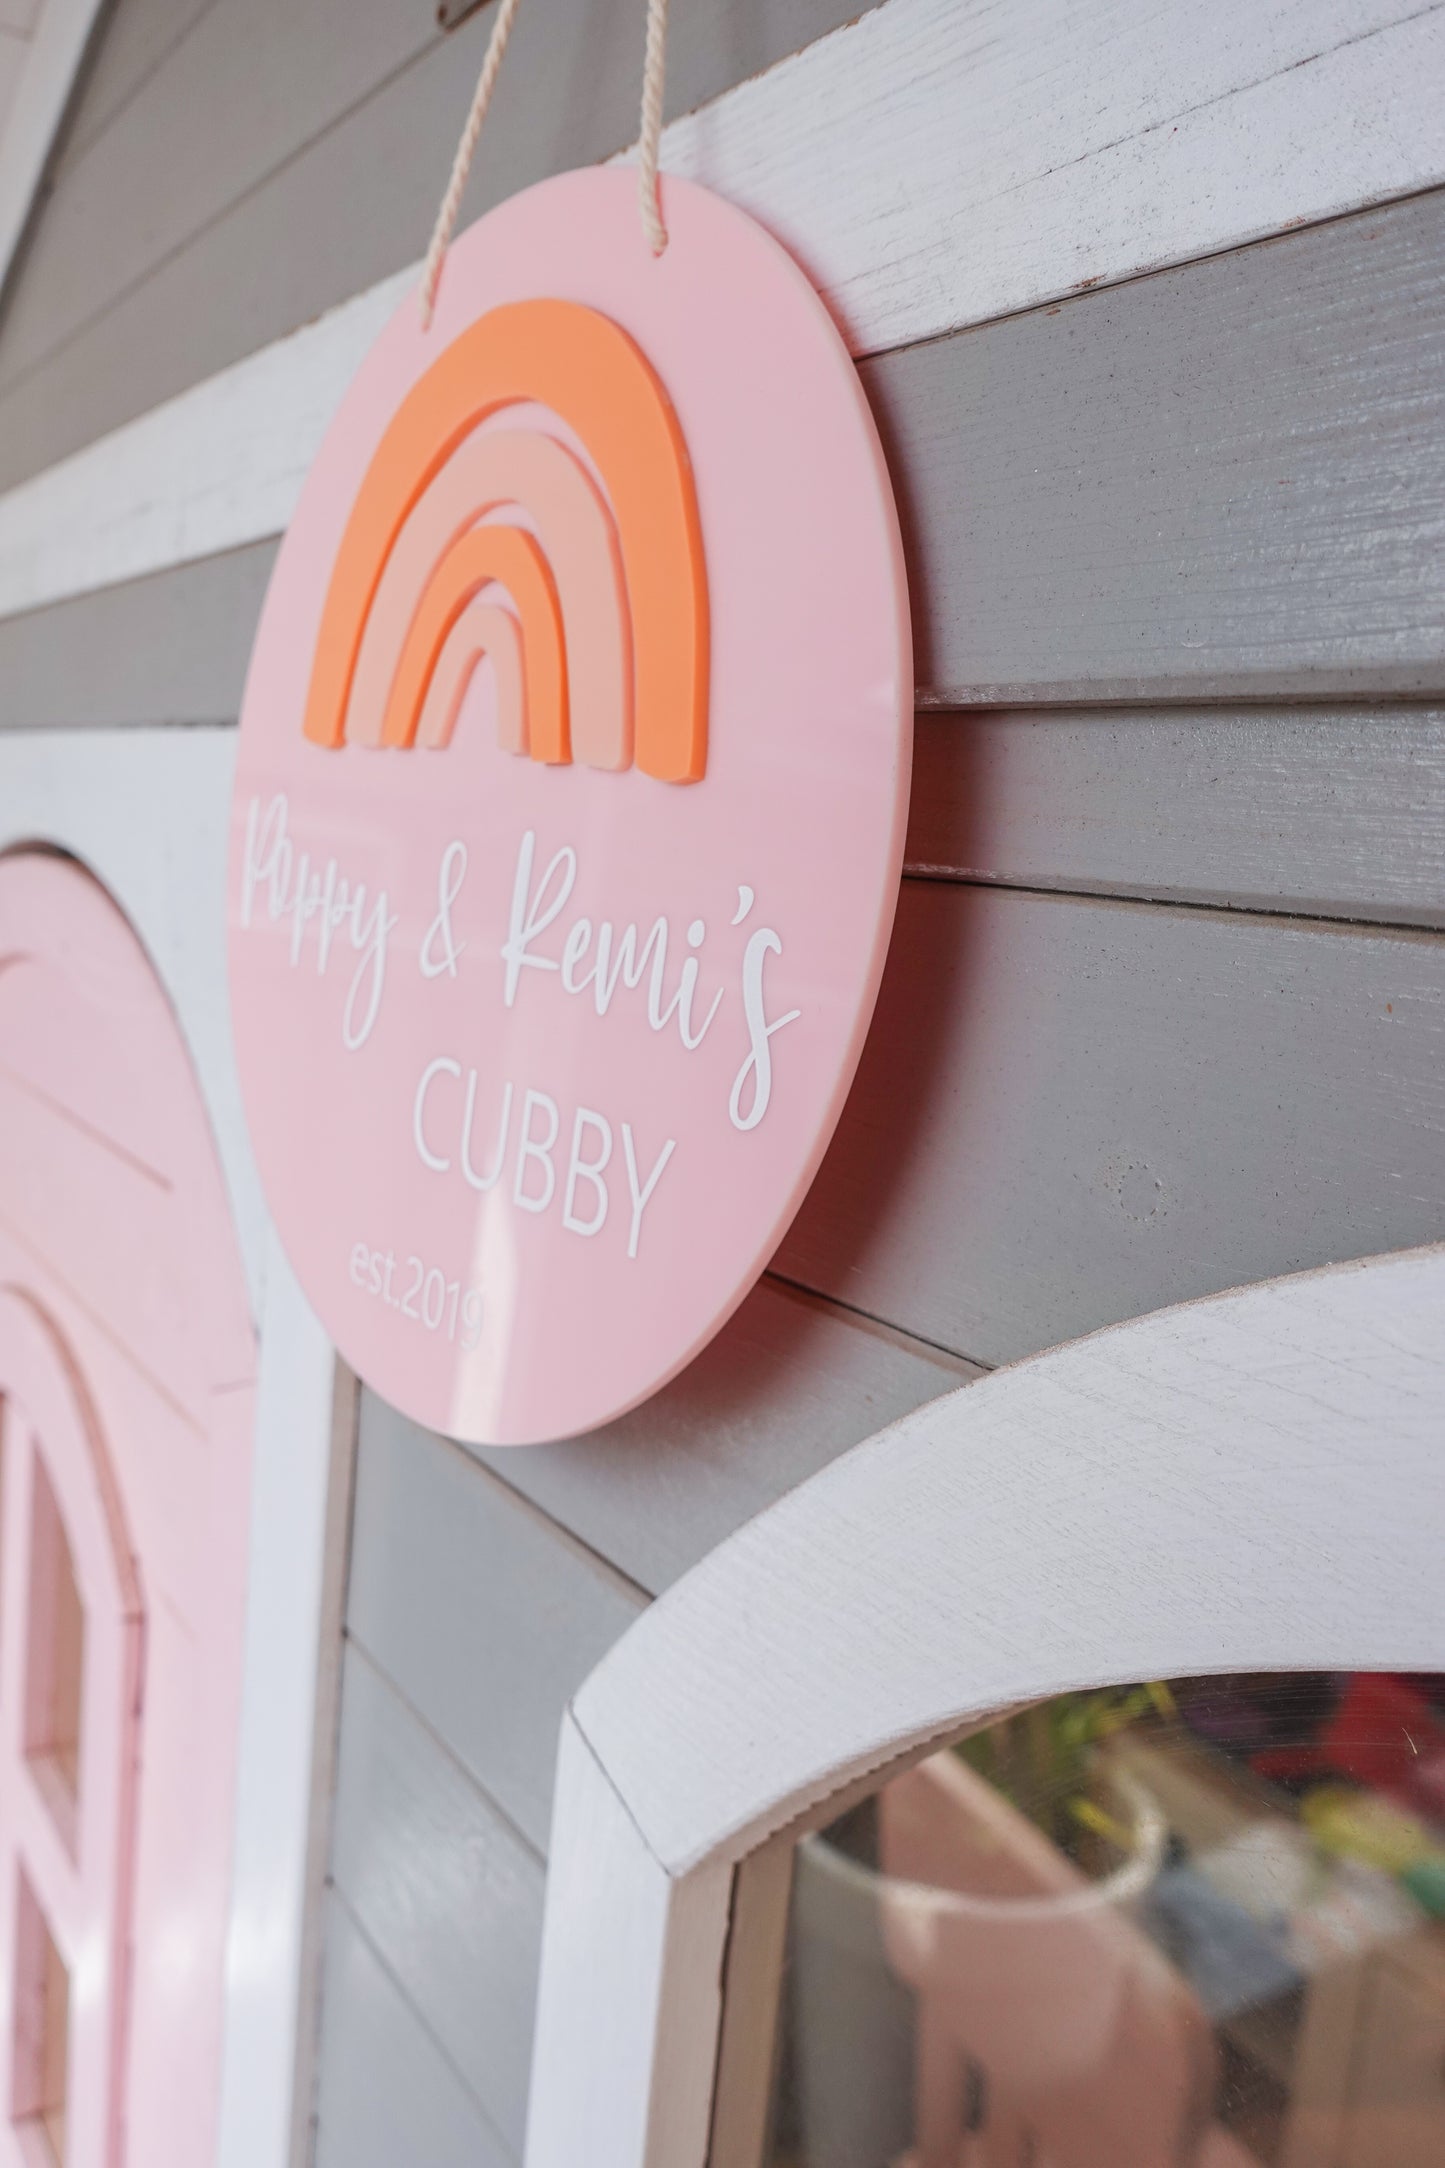 Kids Cubby House Sign